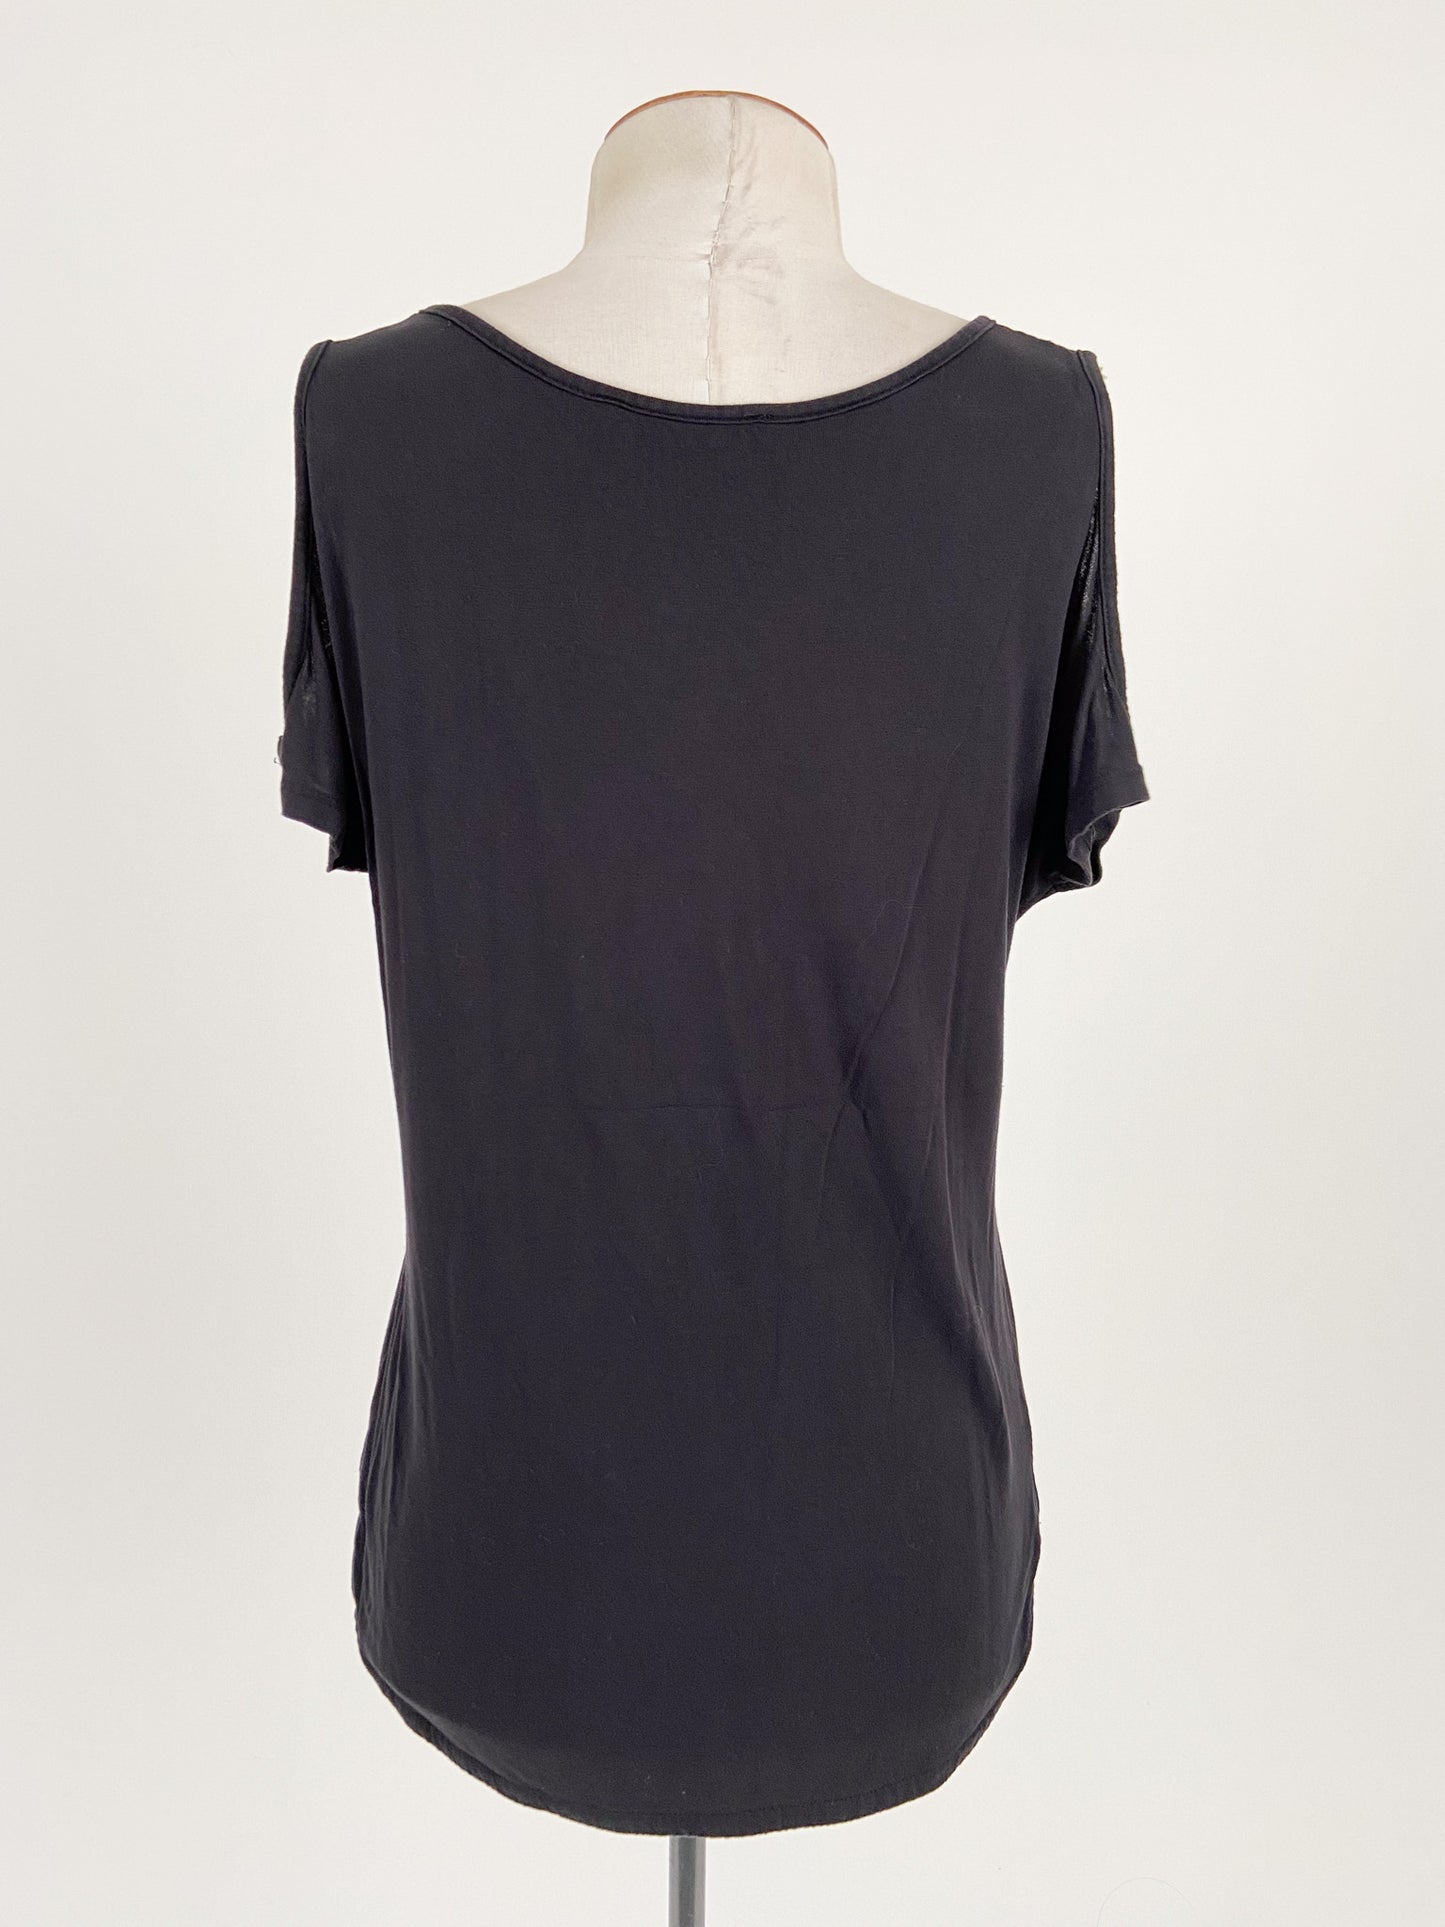 Just Jeans | Black Casual Top | Size XS